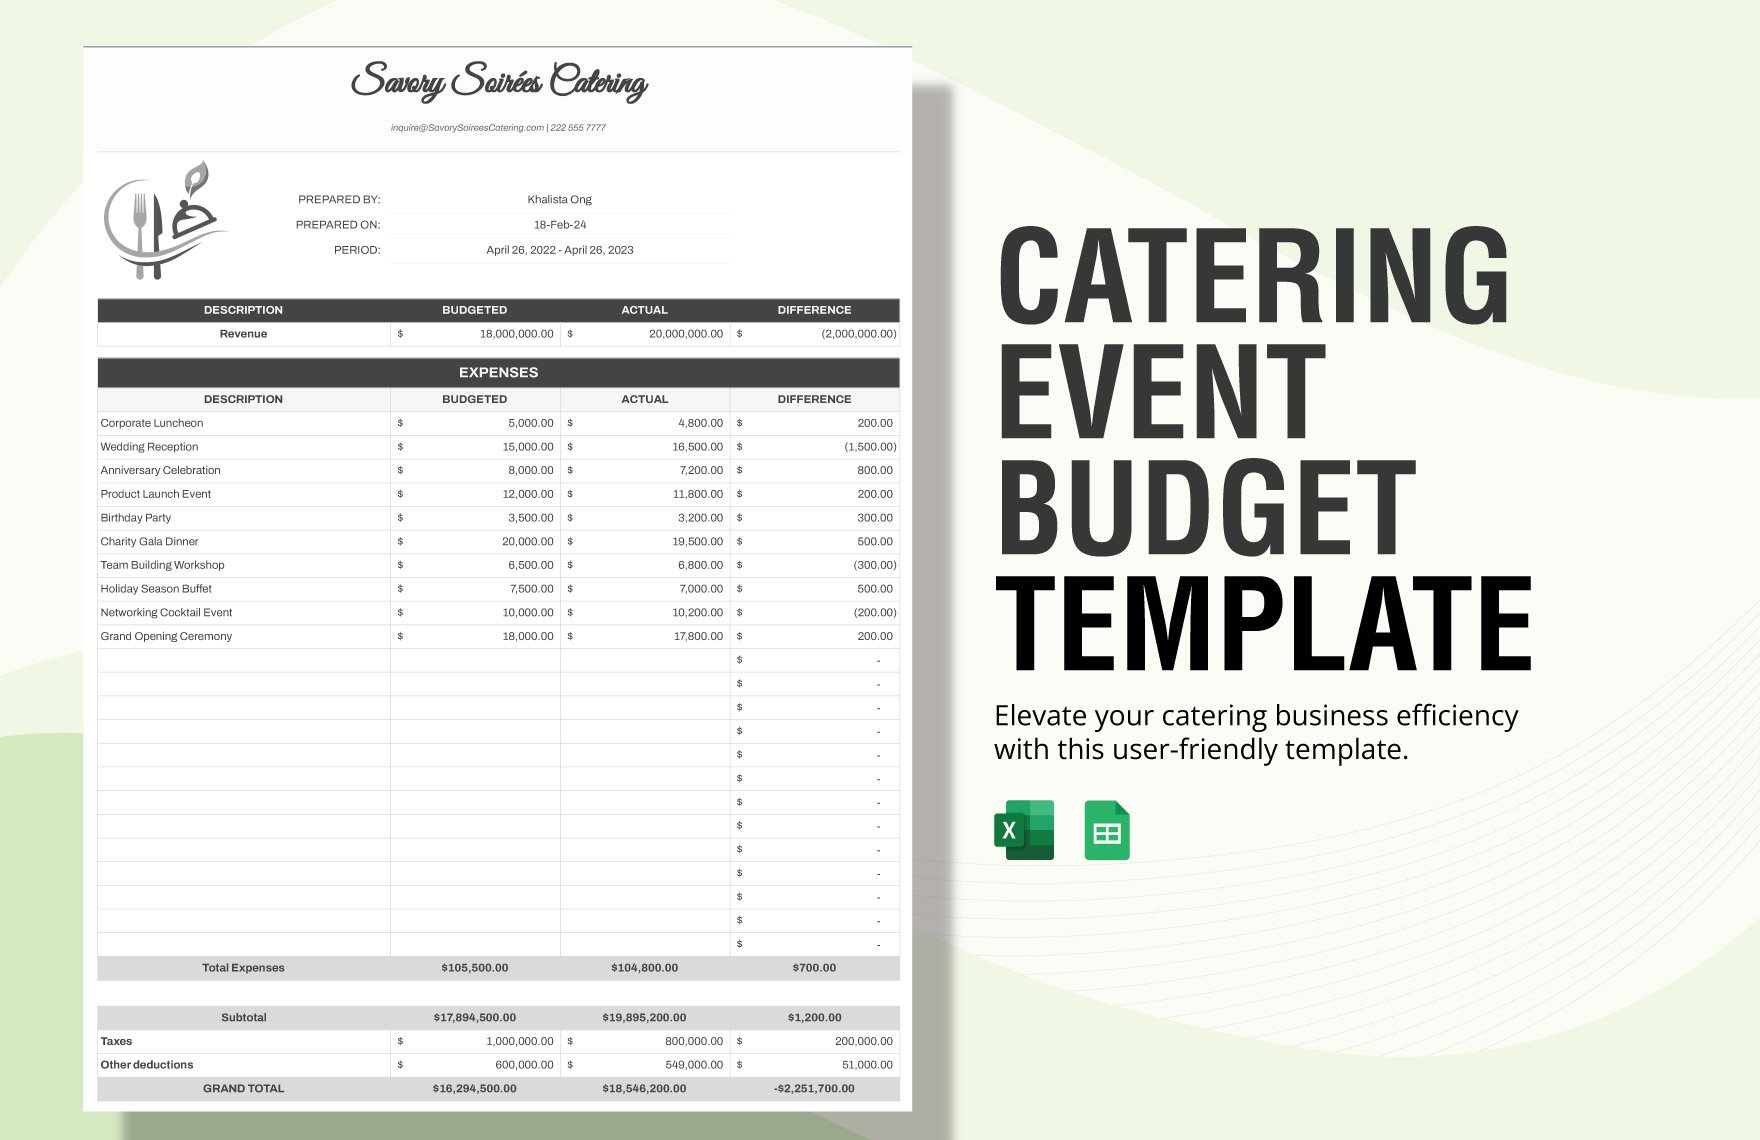 Catering Event Budget Template